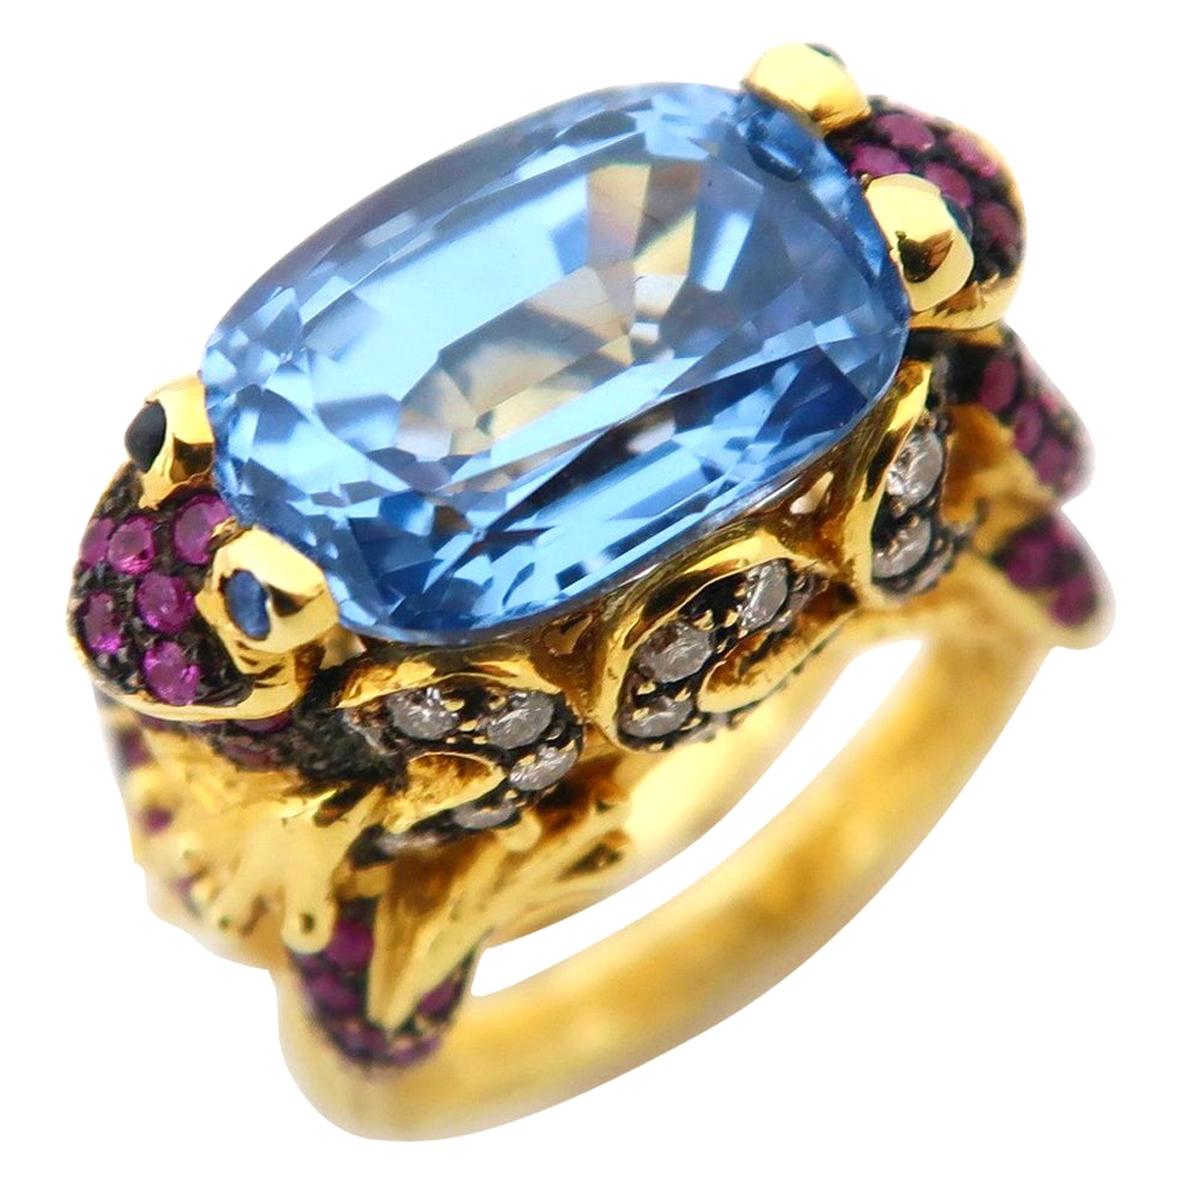 Frog Prince 7.17 Carat Blue Topaz Pink Blue Sapphire Champagne Diamond Gold Ring For Sale